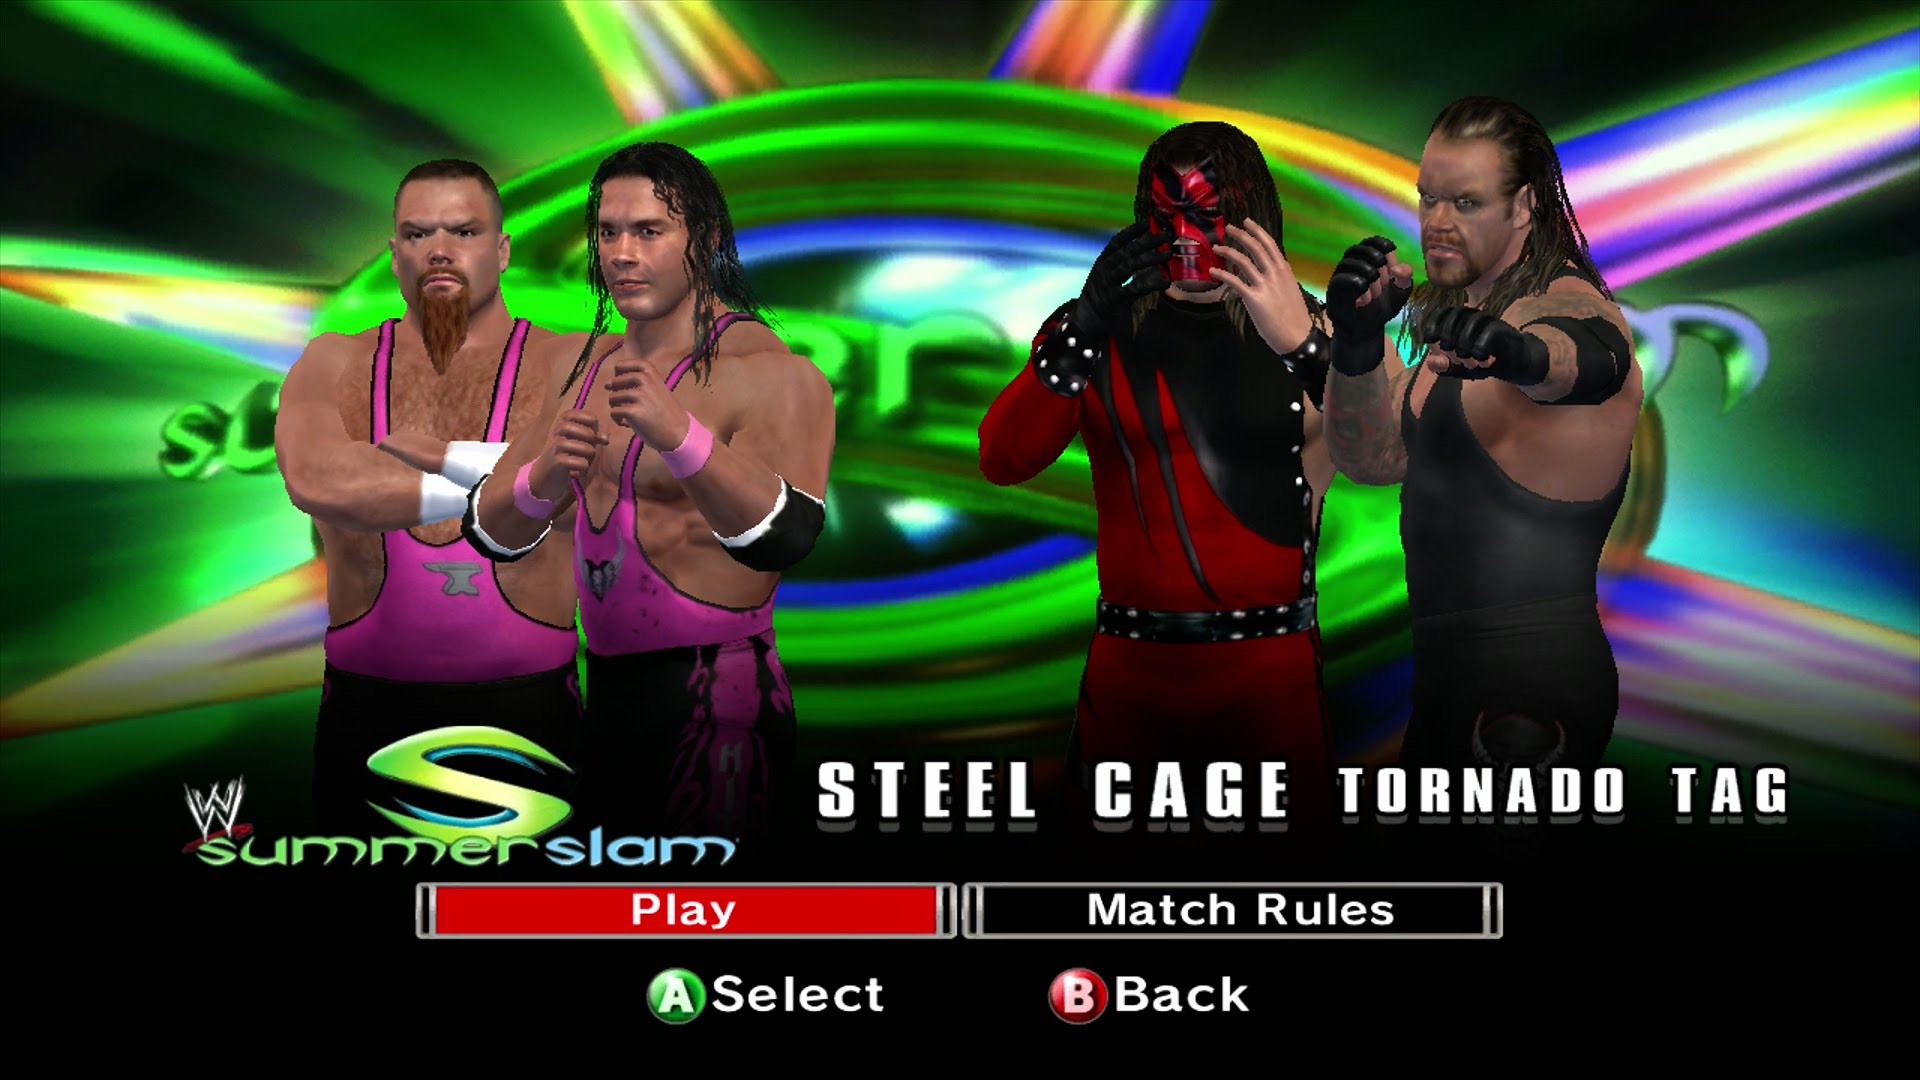 1920x1080 WWE Smackdown Vs. Raw 2007 - Hart Foundation Vs. Brothers of Destruction  (Cage Match)